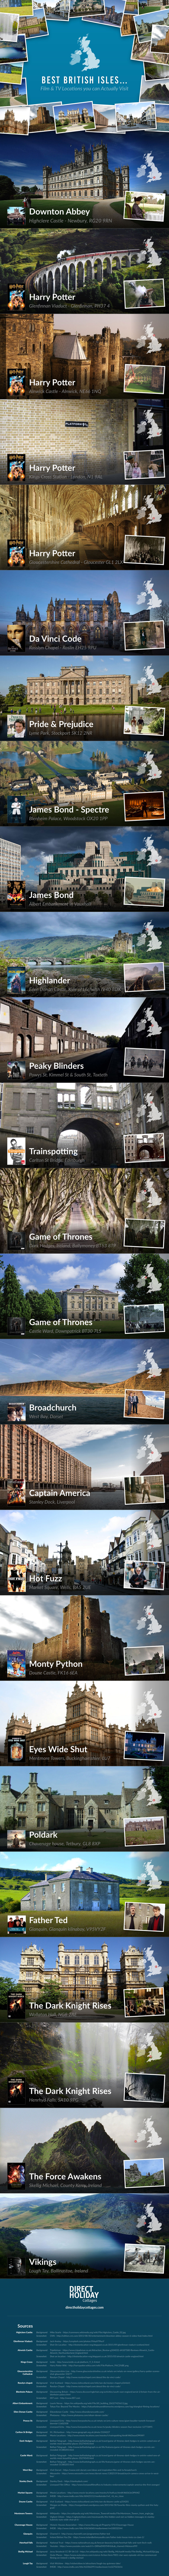 Best British Isles Film & TV Locations You Can Actually Visit (Infographic)